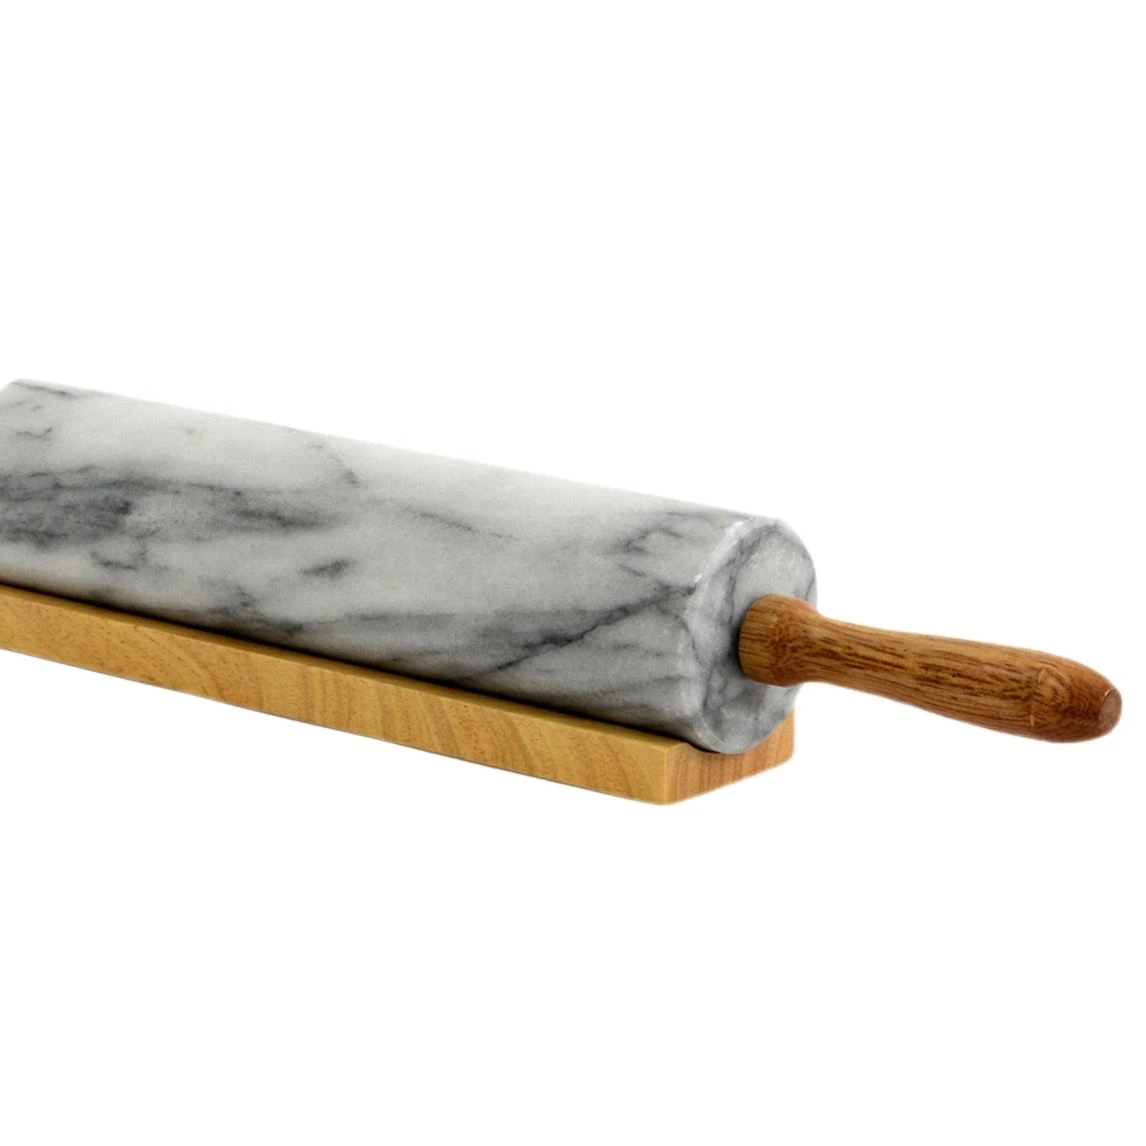 Marble onyx Rolling Pin for kitchen use ISO 9001 and ISO 22000 certified company  origin pakistan  pk